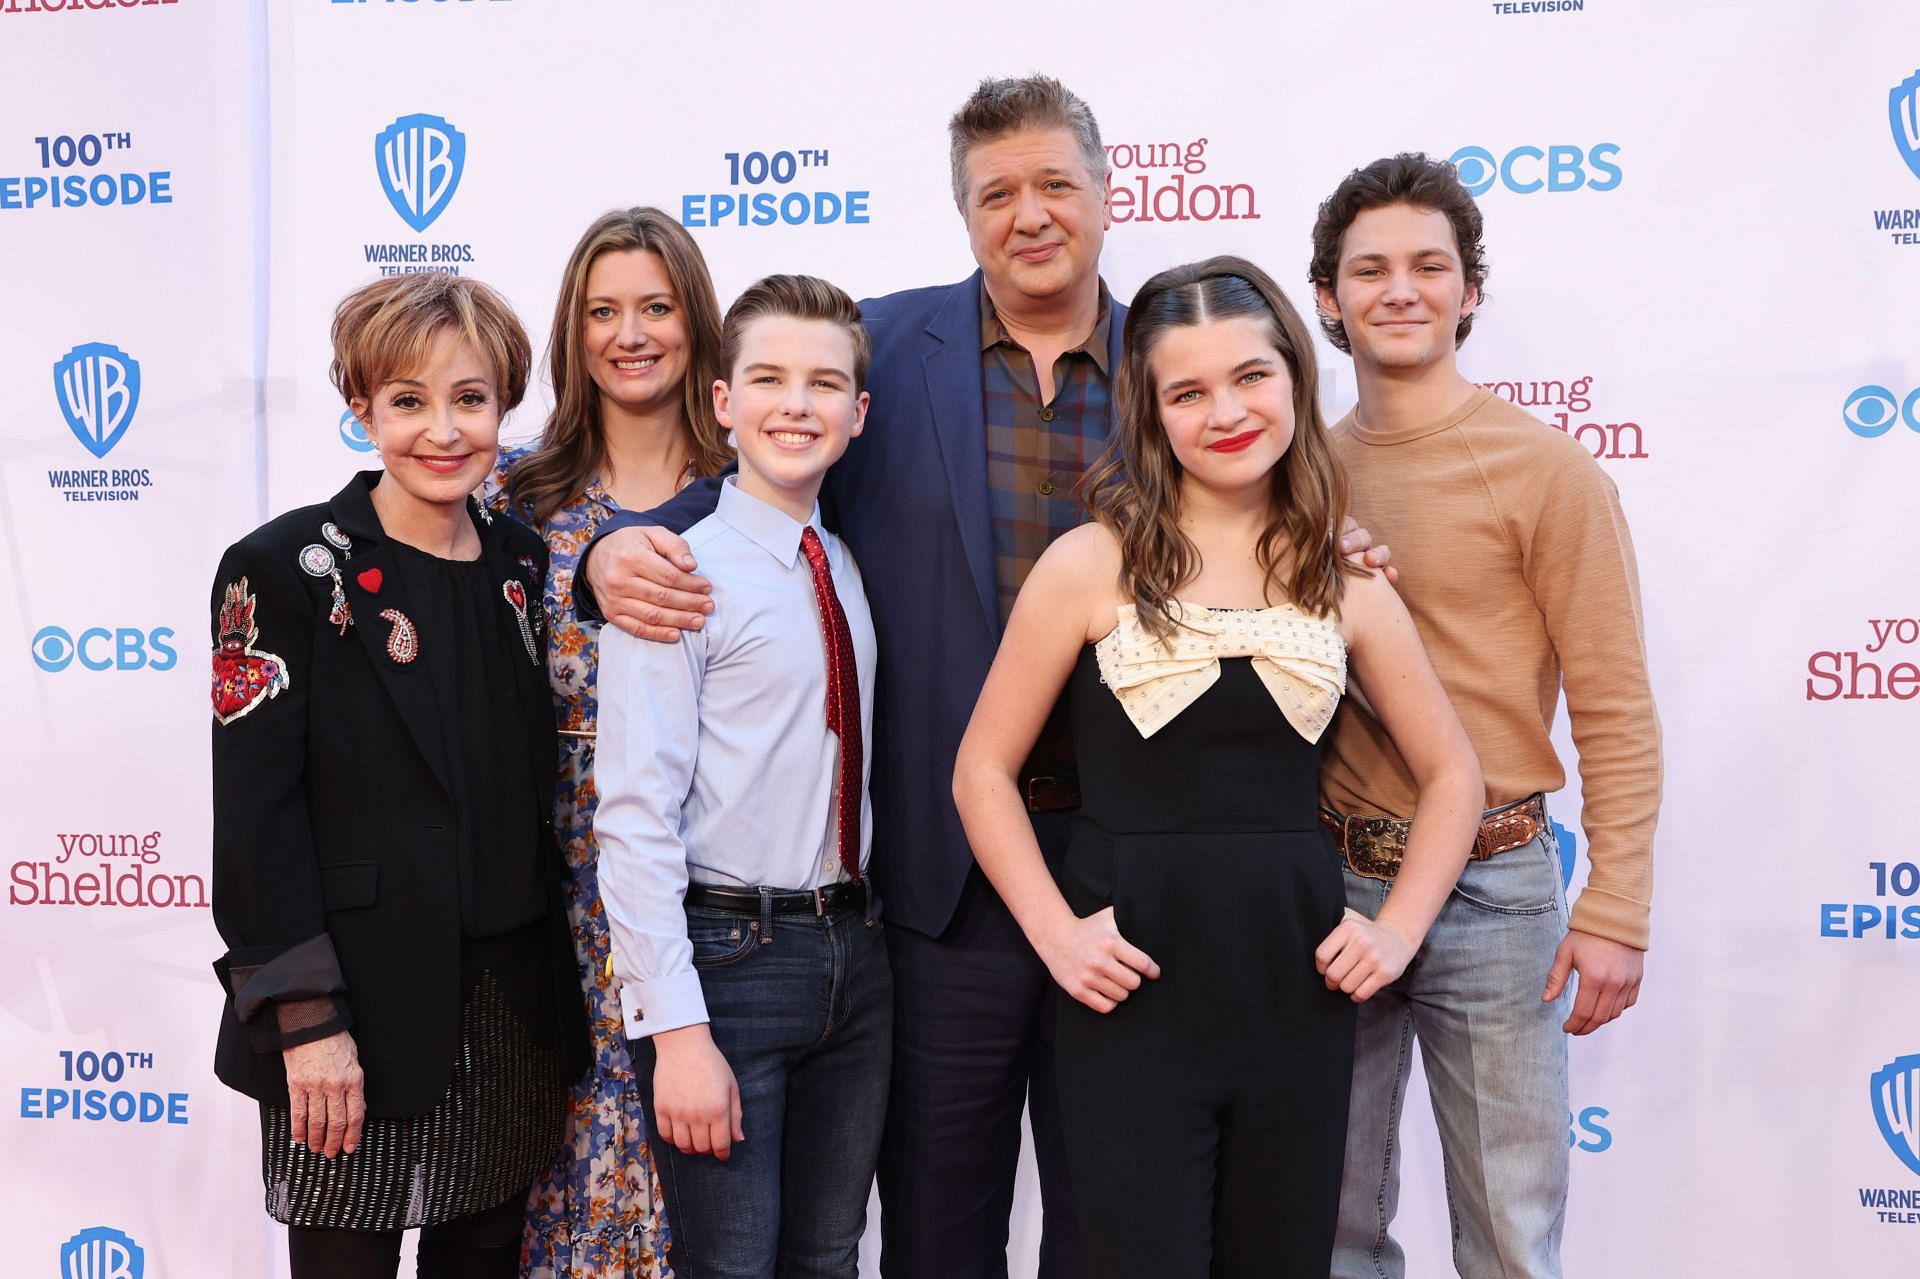 Premiere Of Warner Bros. 100th Episode Of &quot;Young Sheldon&quot; - Arrivals